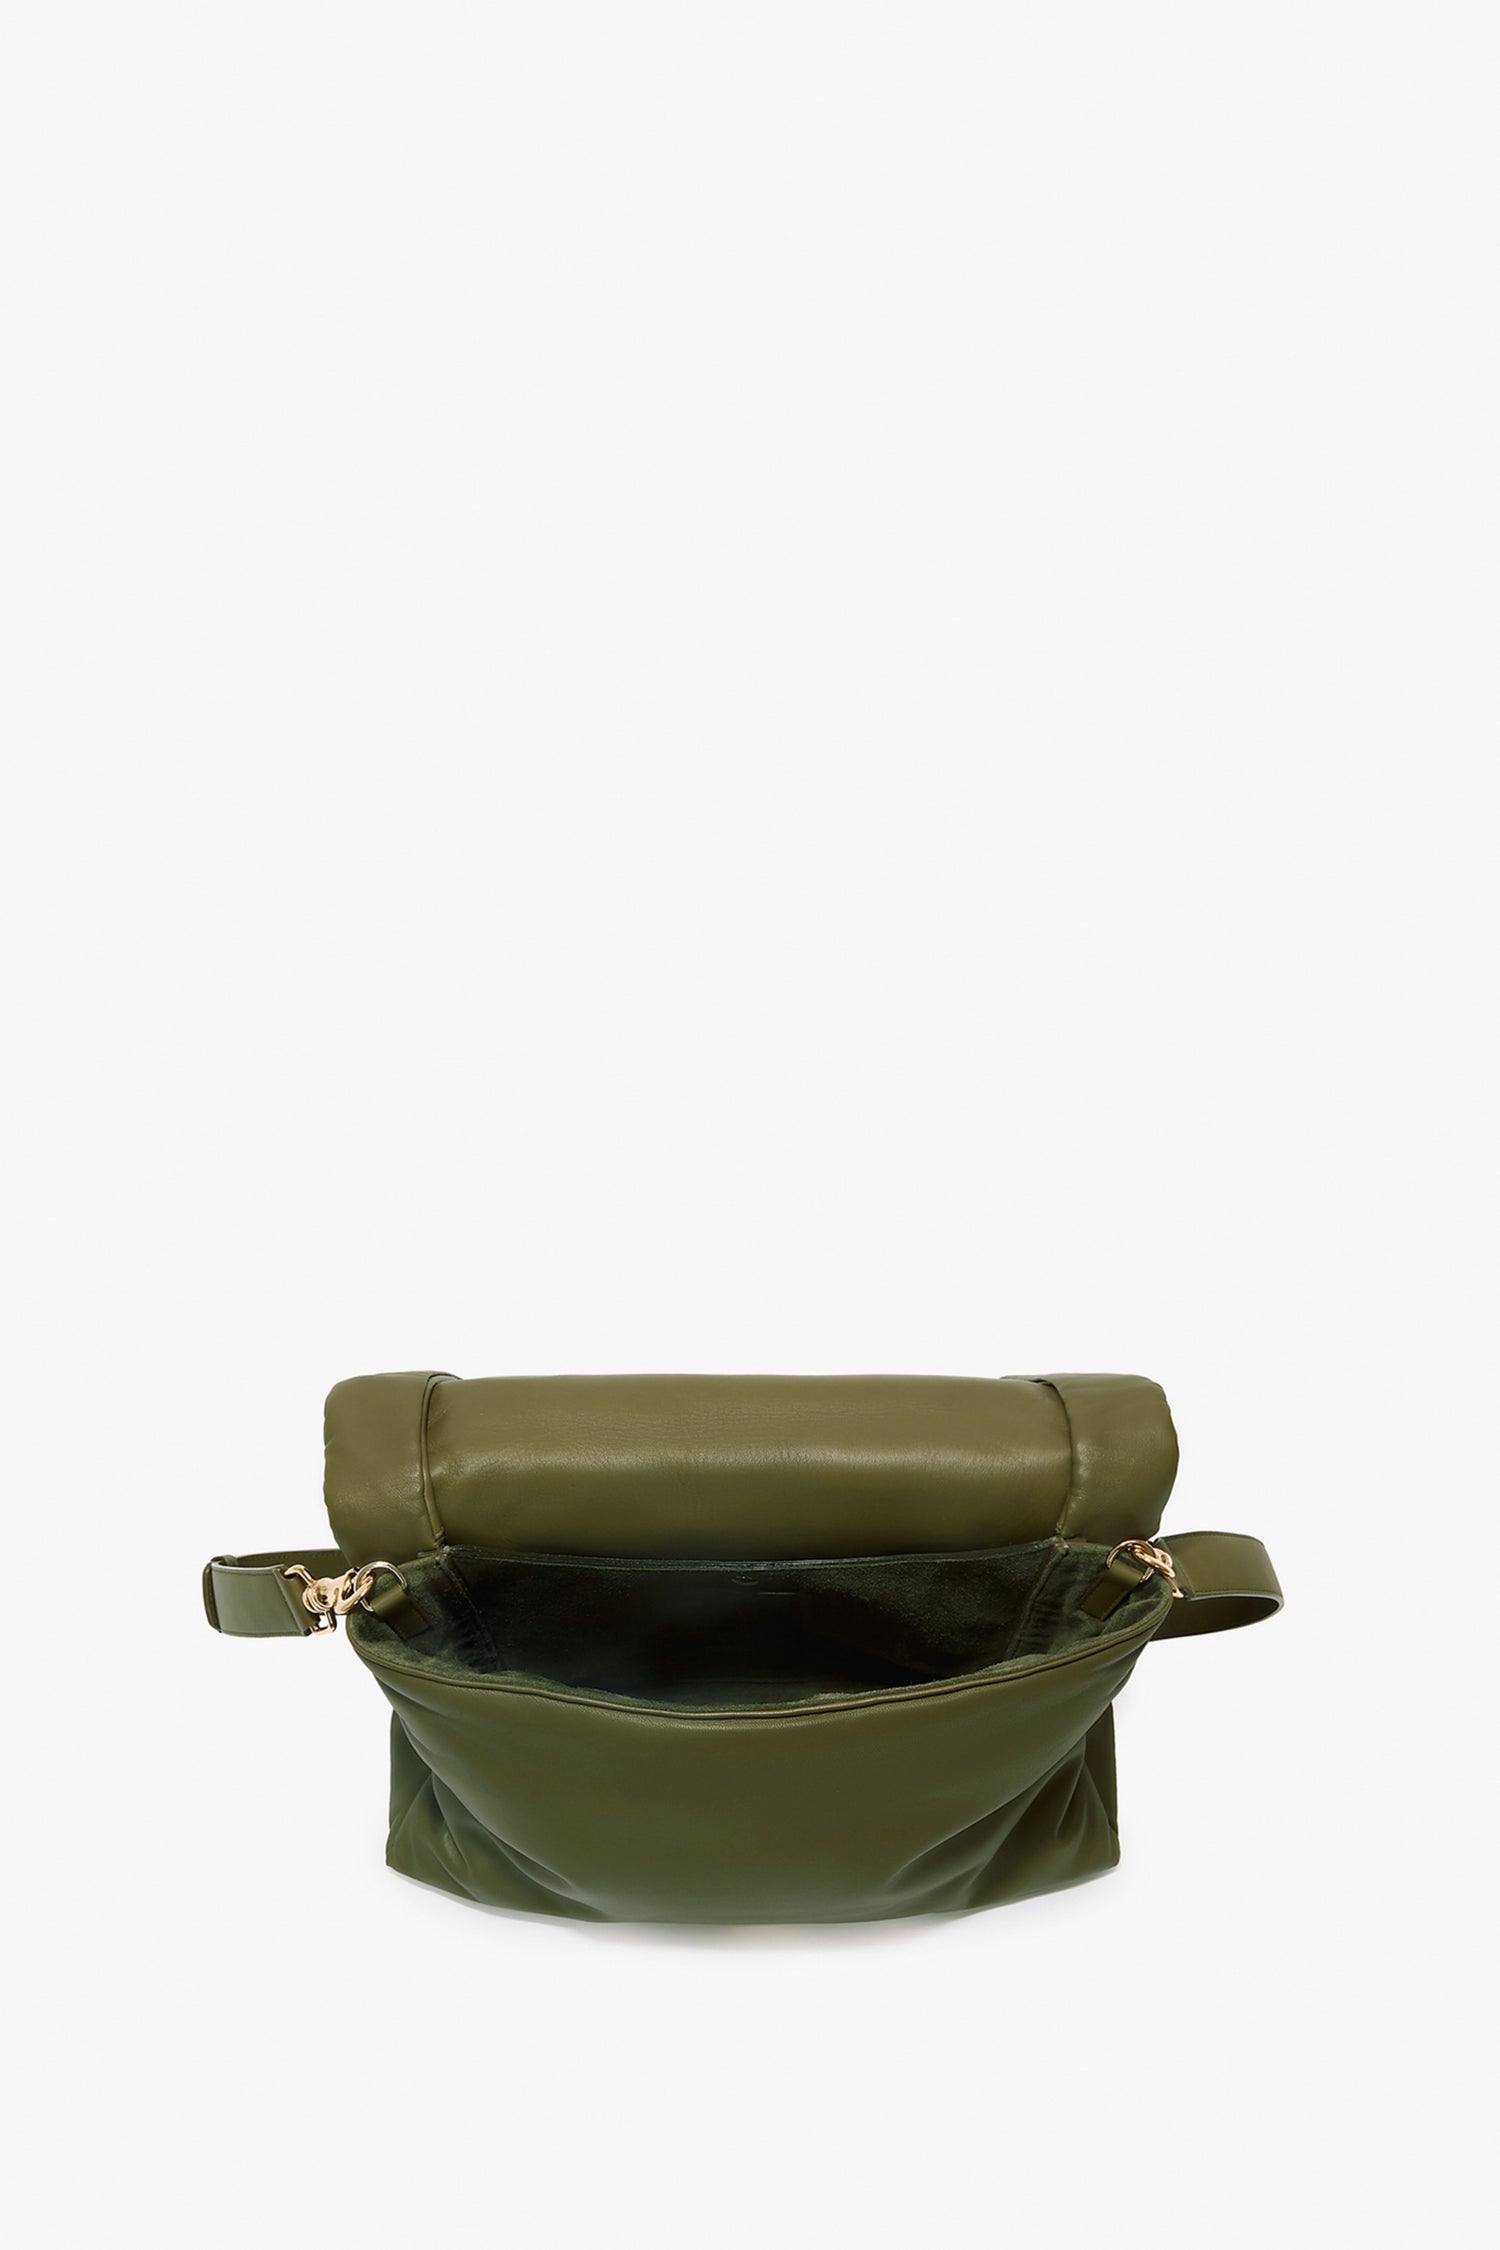 Open Puffy Jumbo Chain Pouch In Khaki Leather from Victoria Beckham with a rolled top handle, an adjustable shoulder strap, and an open main compartment crafted from luxurious sheepskin nappa leather.